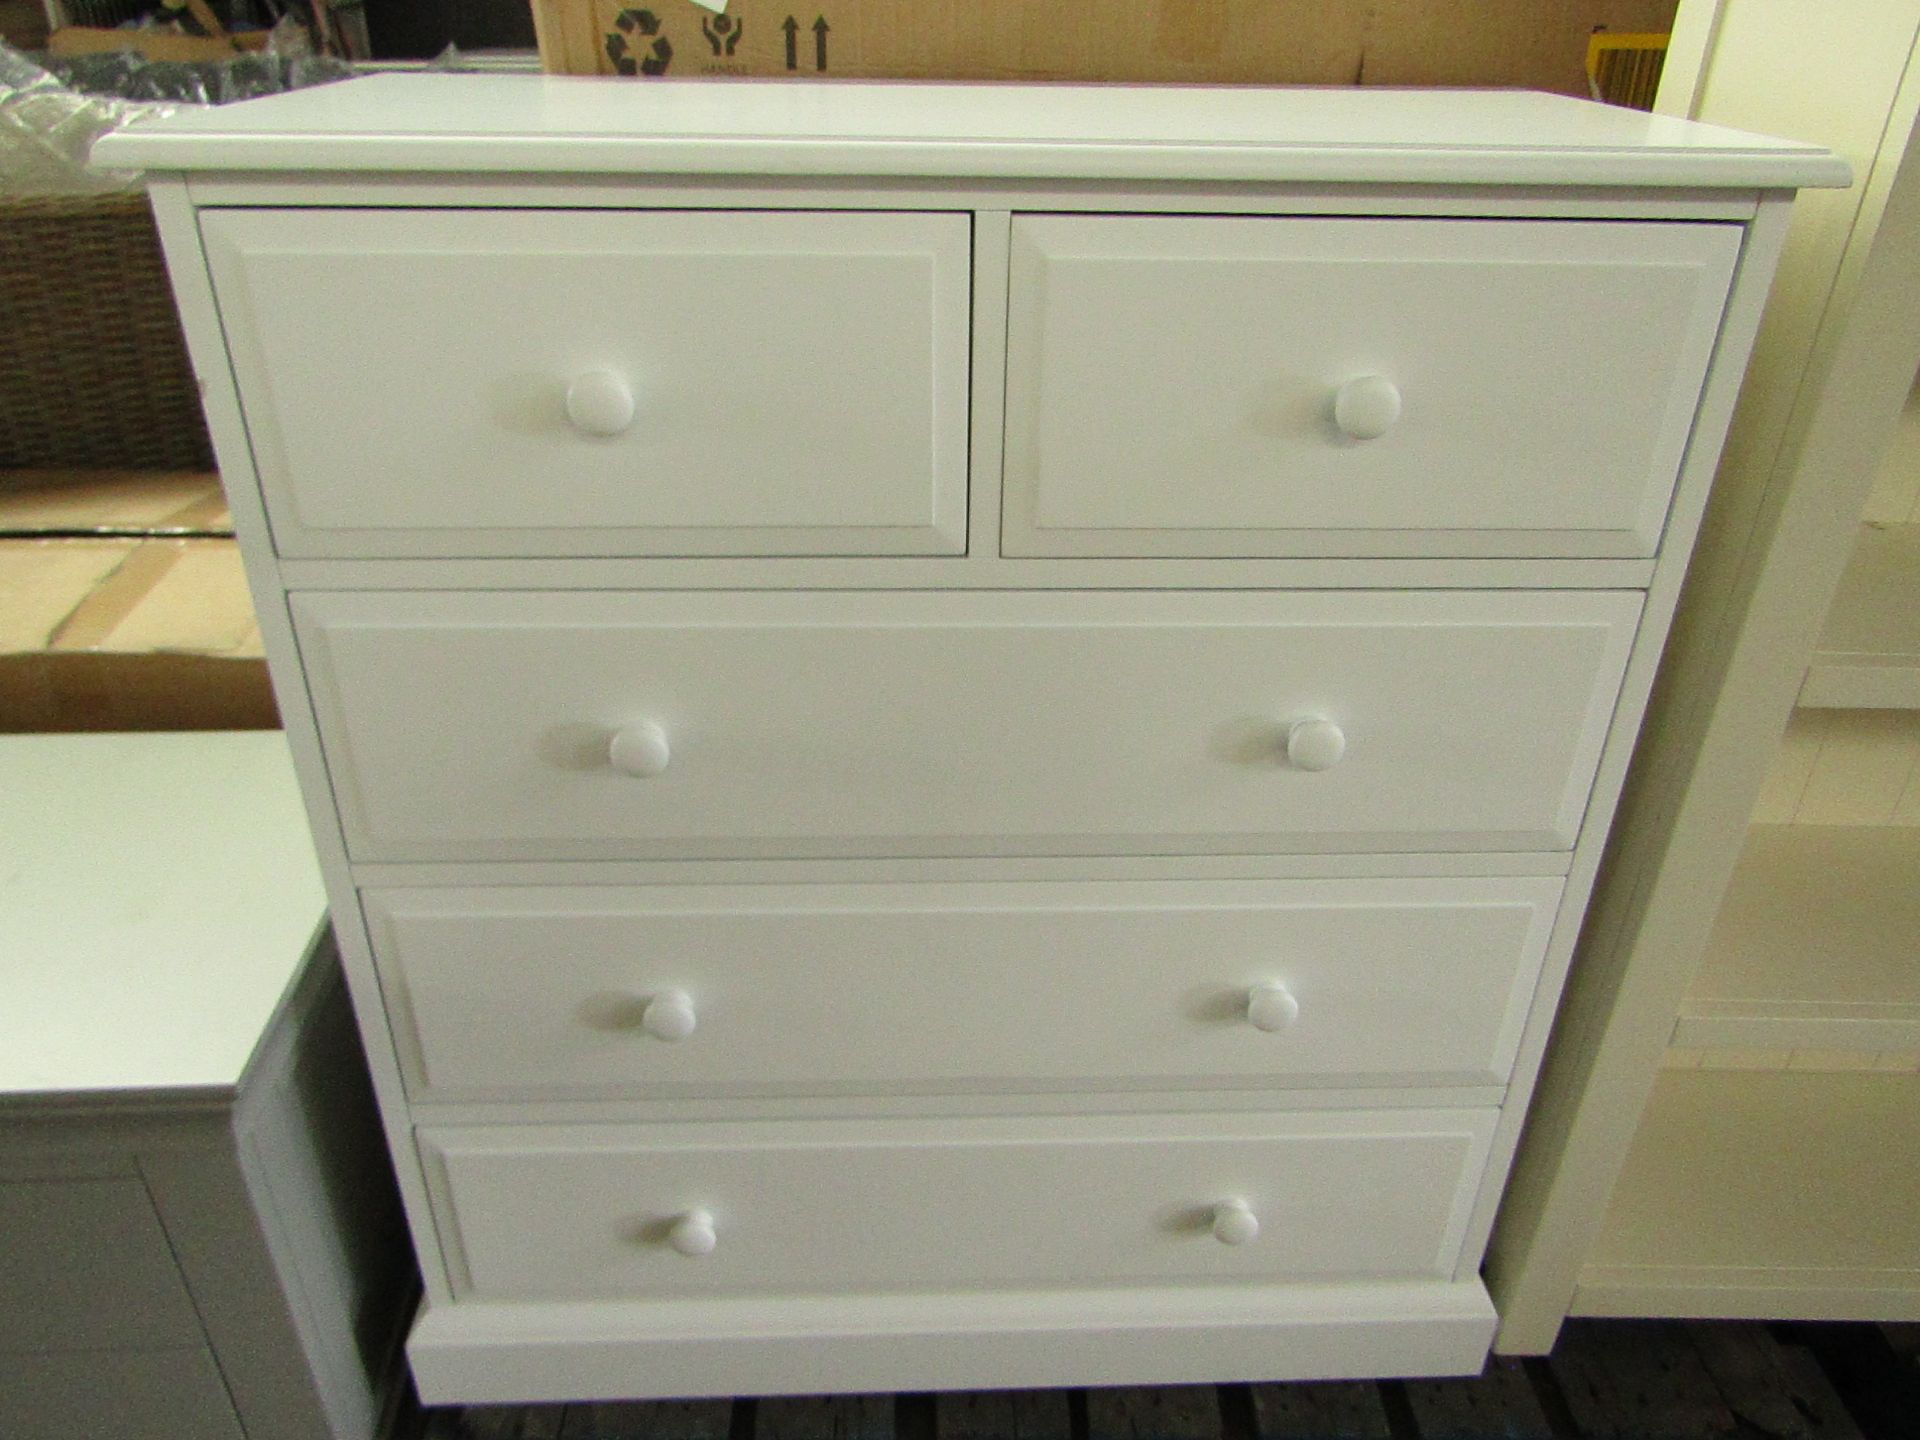 Cotswold Company Pensham Dove Grey 2+3 Chest of Drawers RRP Â£350.00 - The items in this lot are